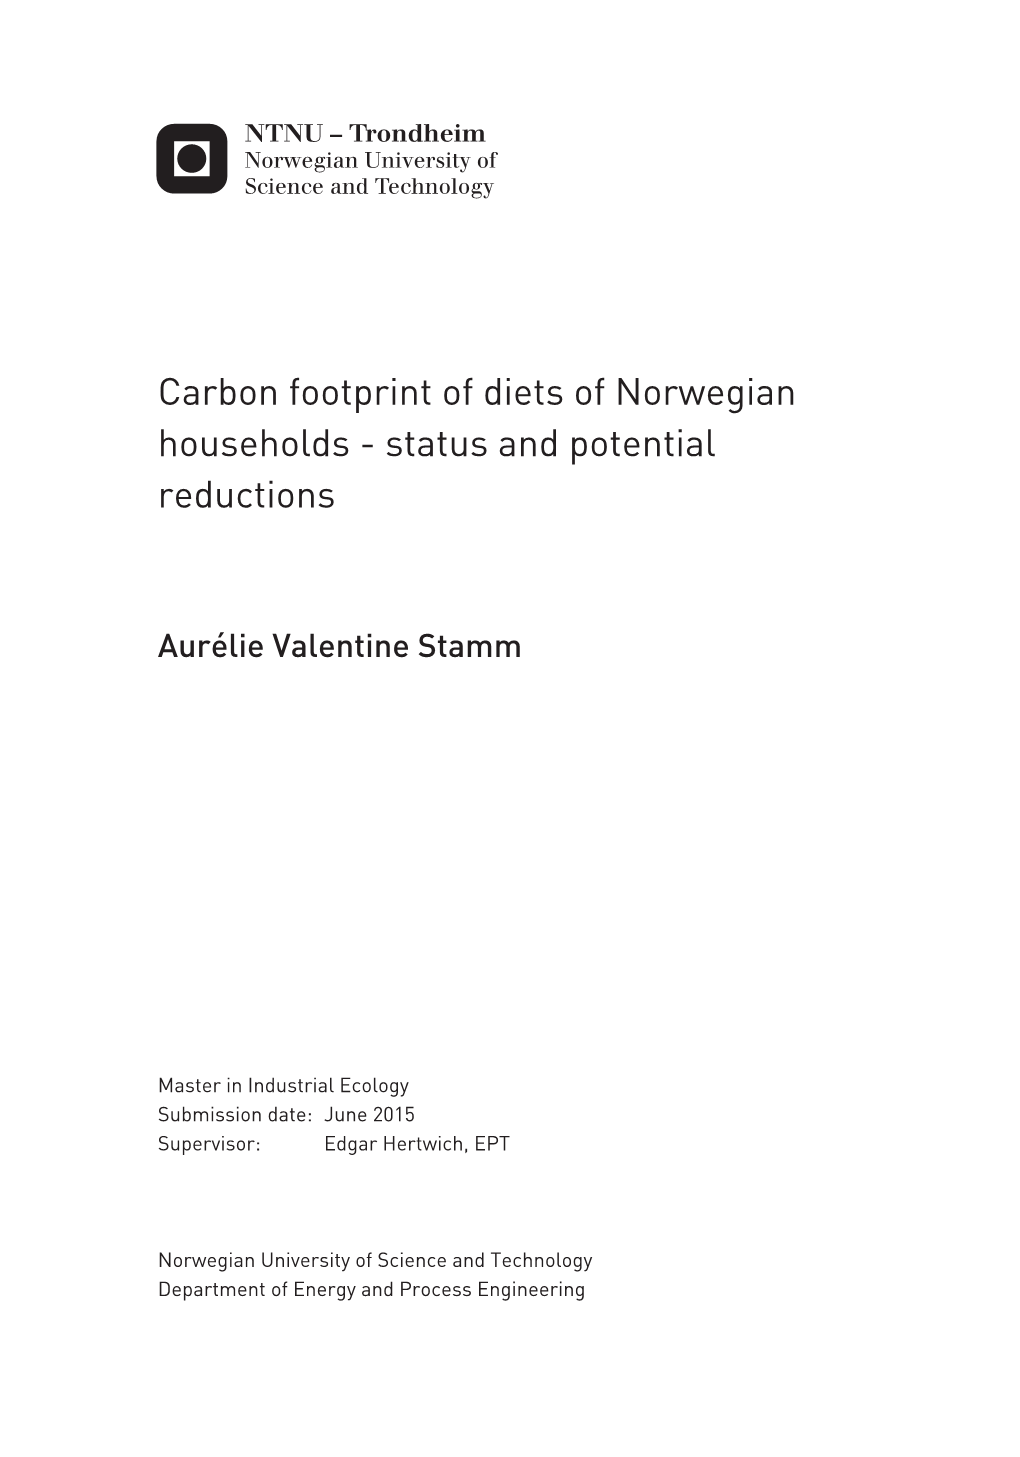 Carbon Footprint of Diets of Norwegian Households - Status and Potential Reductions